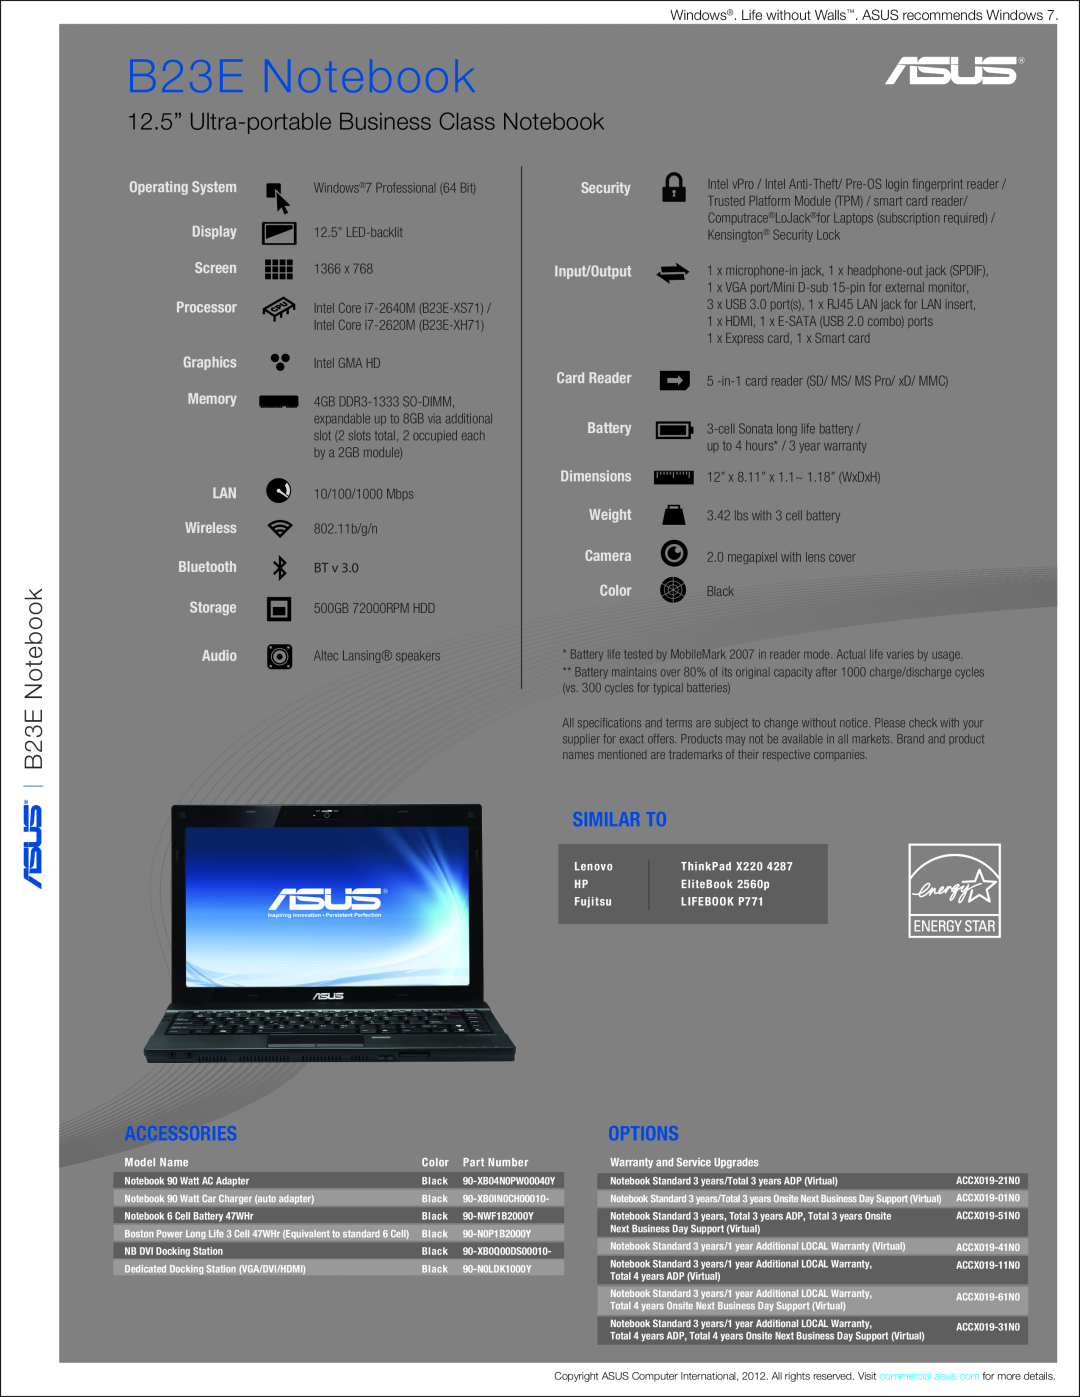 Asus B23EXH71 B23E Notebook, 12.5” Ultra-portable Business Class Notebook, Similar To, Accessories, Options, Battery 